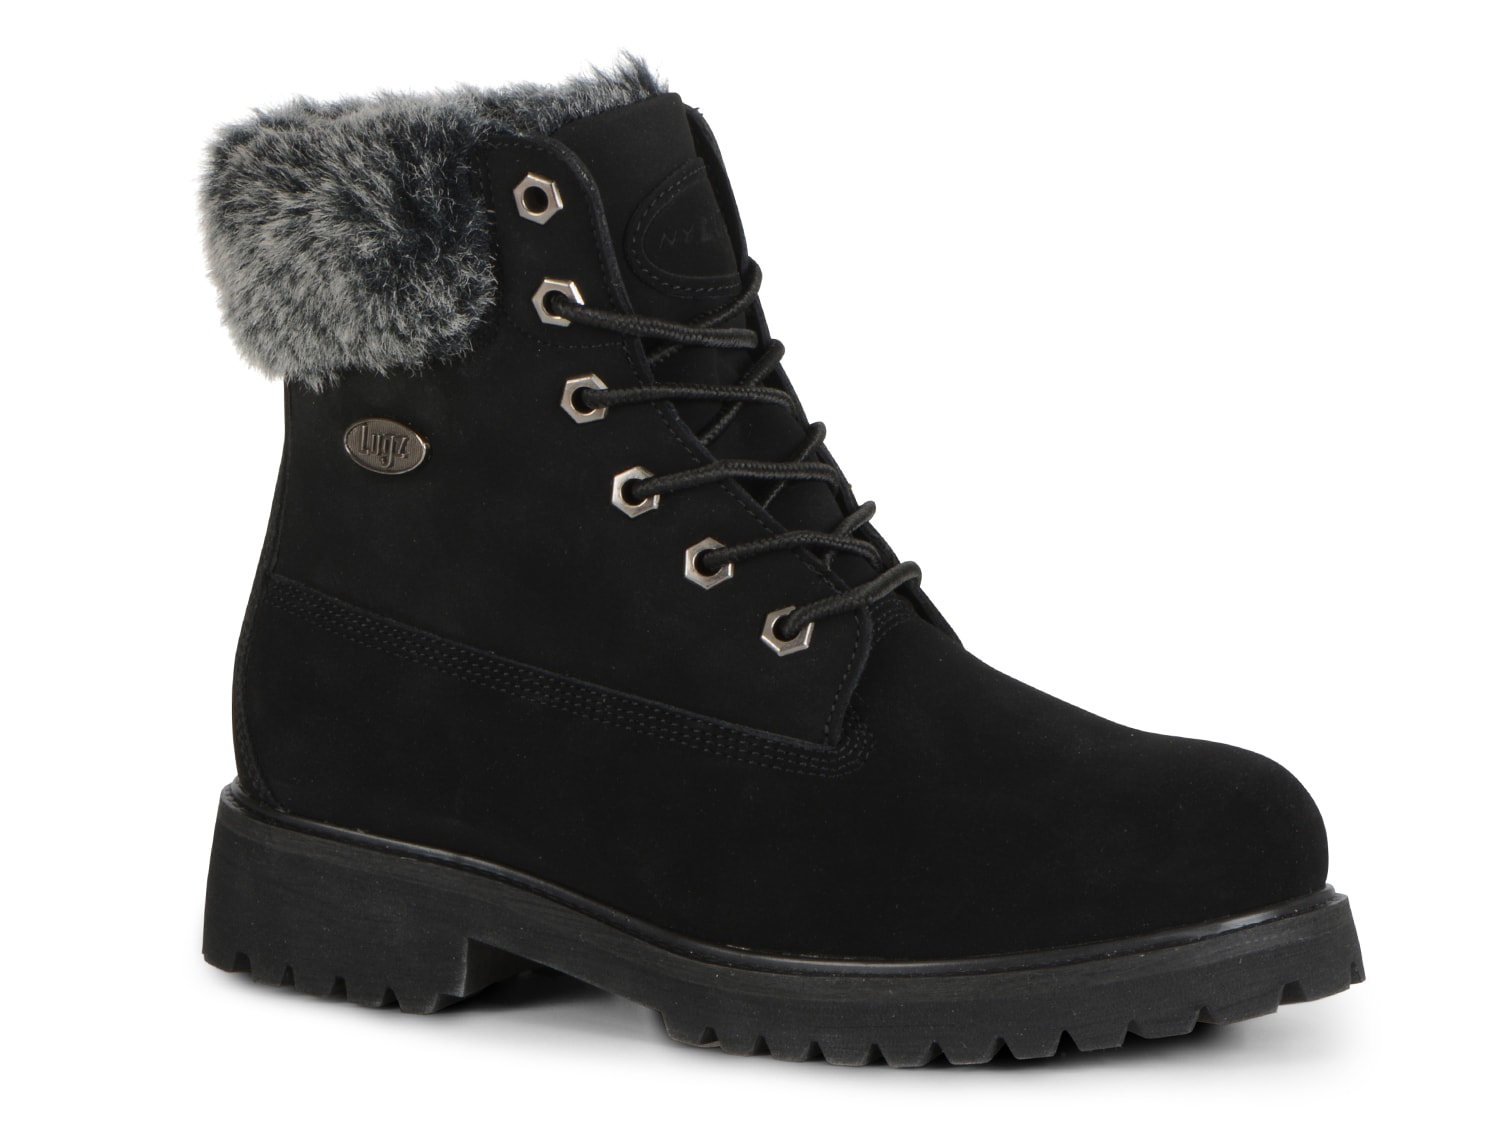 Lugz Convoy Combat Boot - Free Shipping | DSW